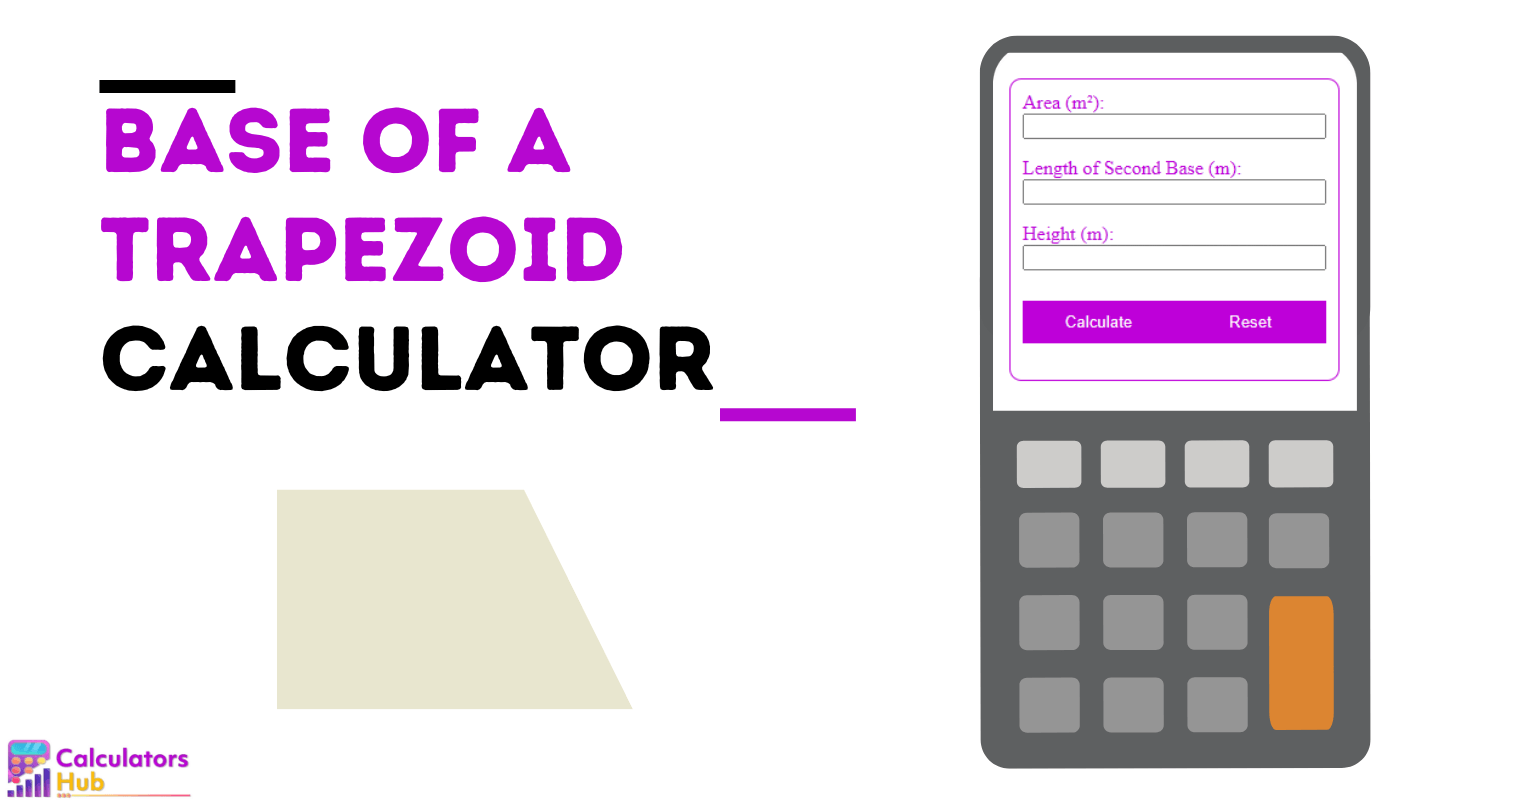 Base of a Trapezoid Calculator